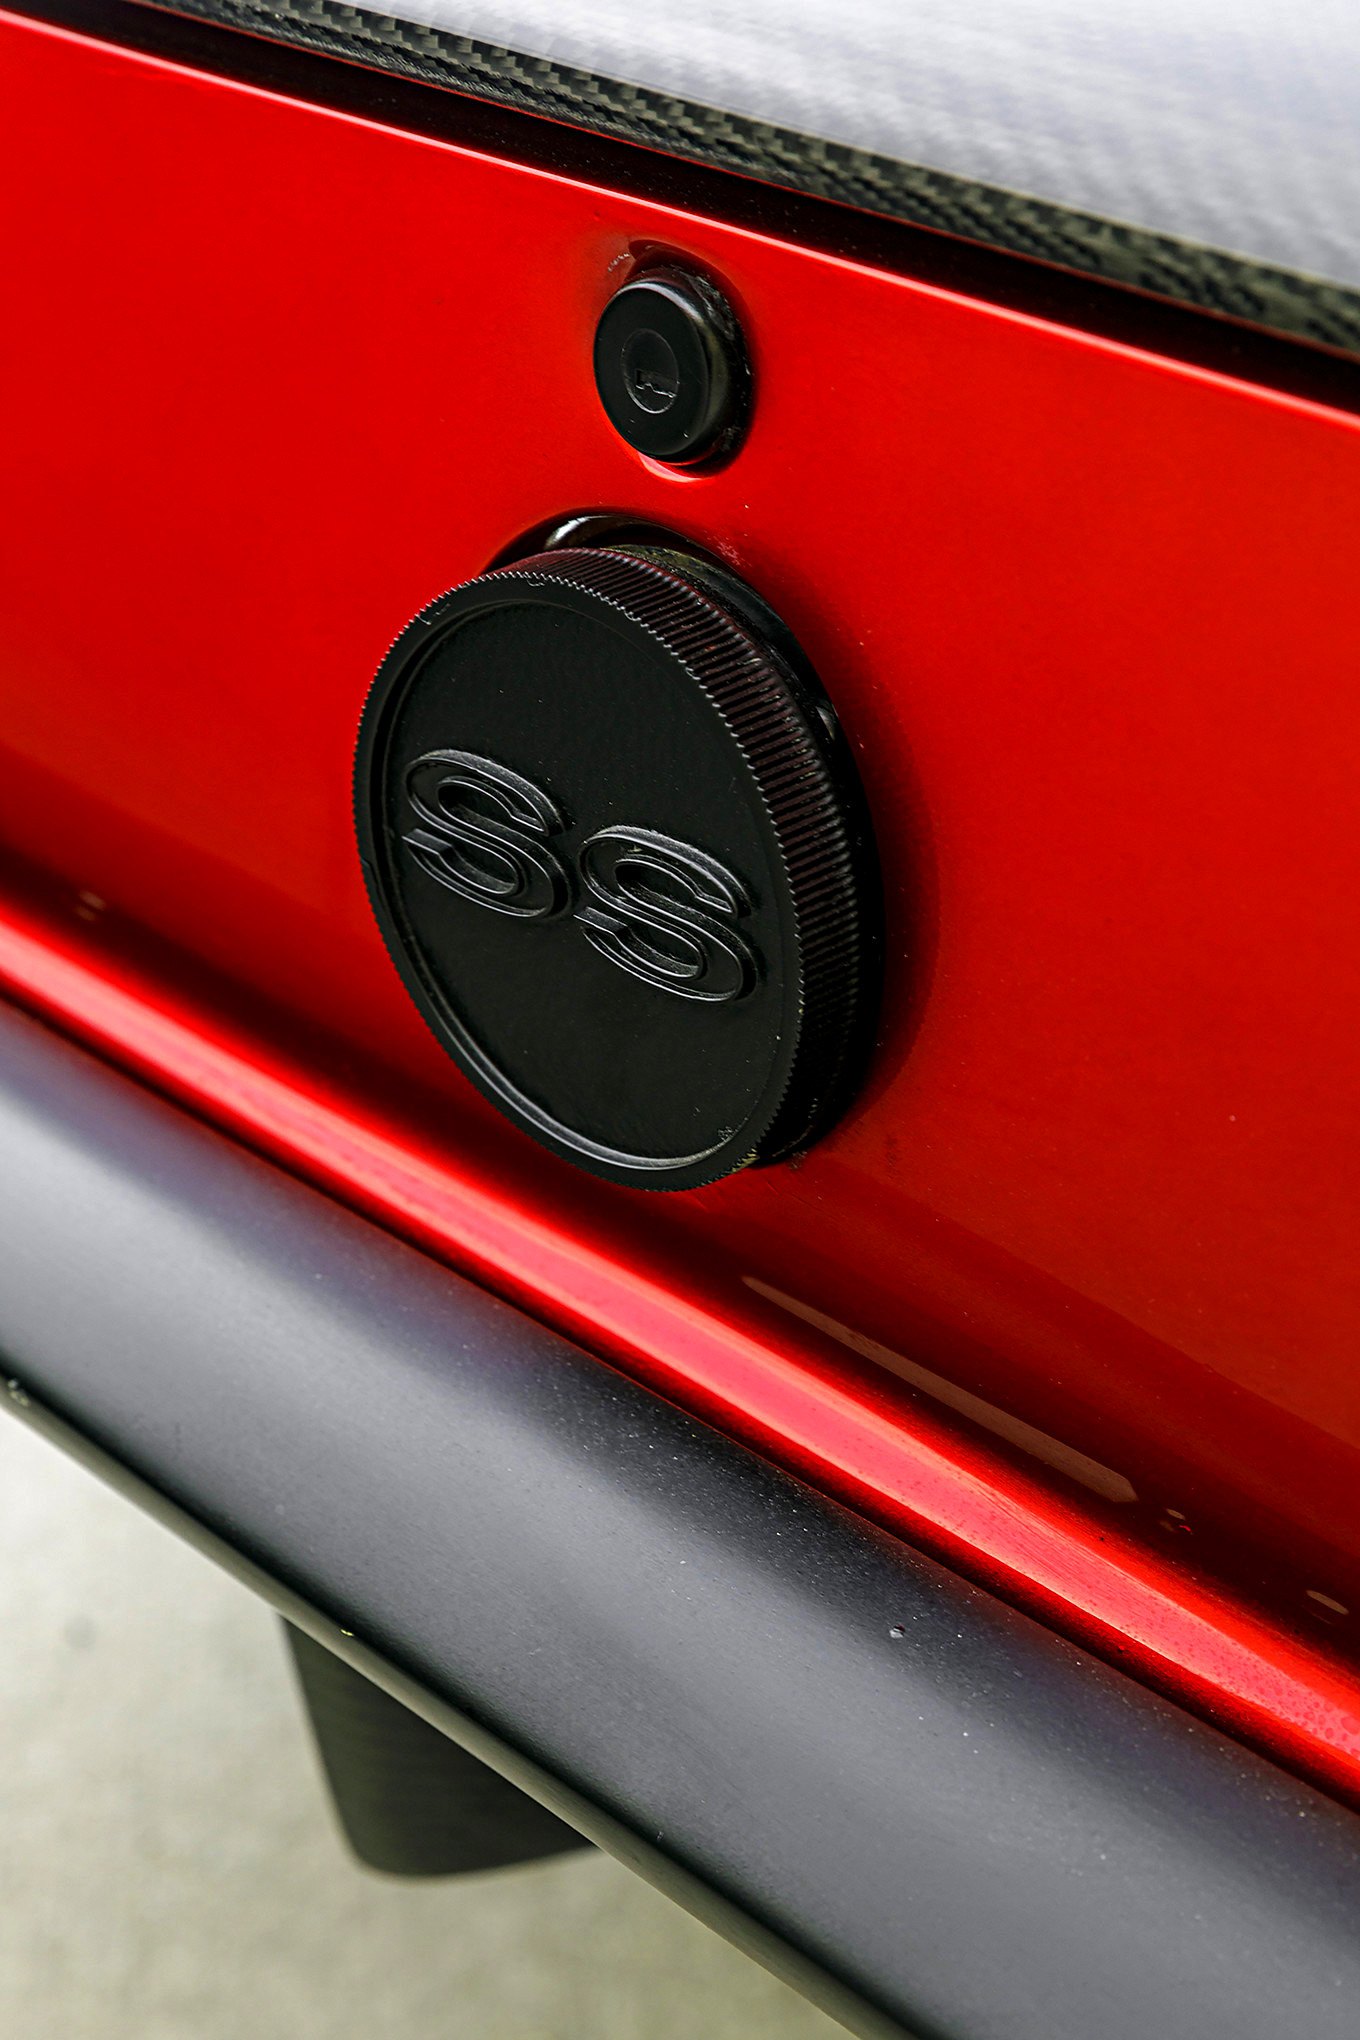 Carbon Fiber Emblem on Red Chevy Camaro SS - Photo by Robert McGaffin